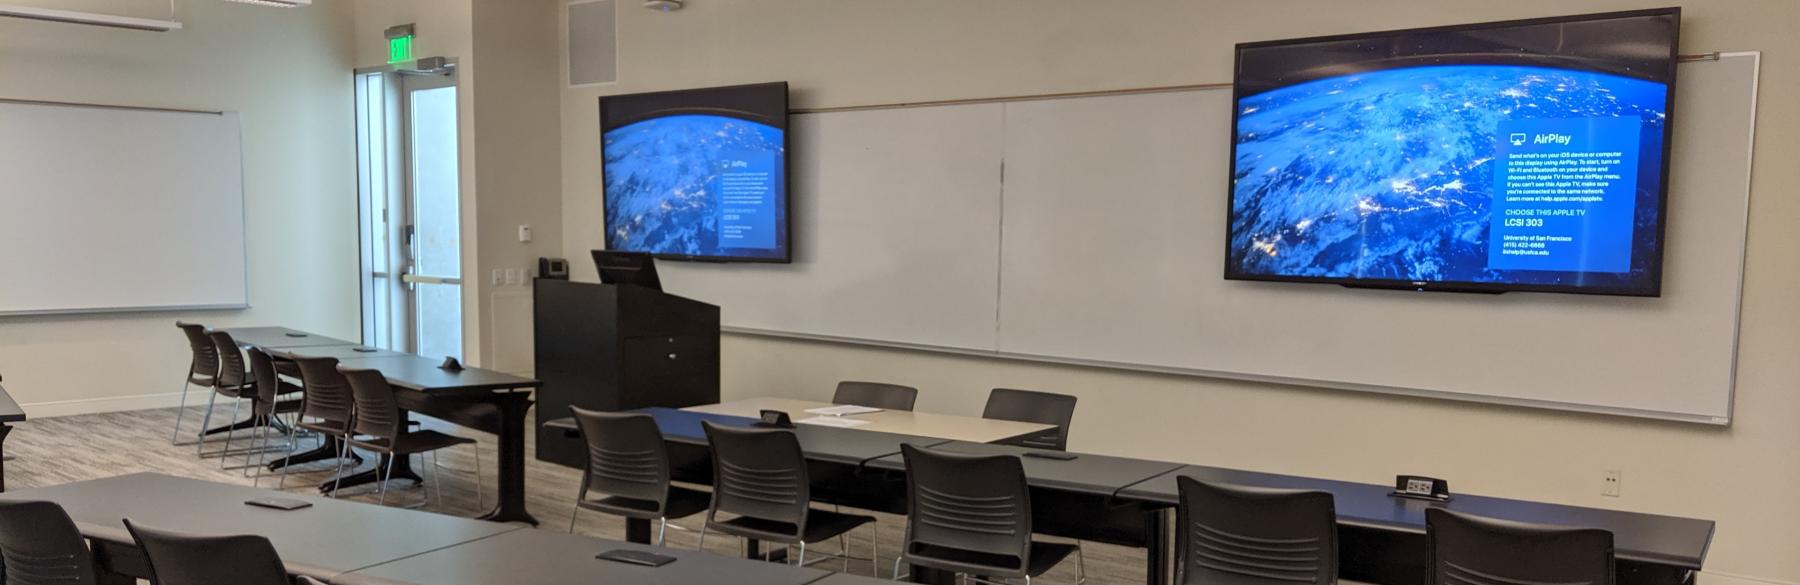 Photo of a classroom at USF